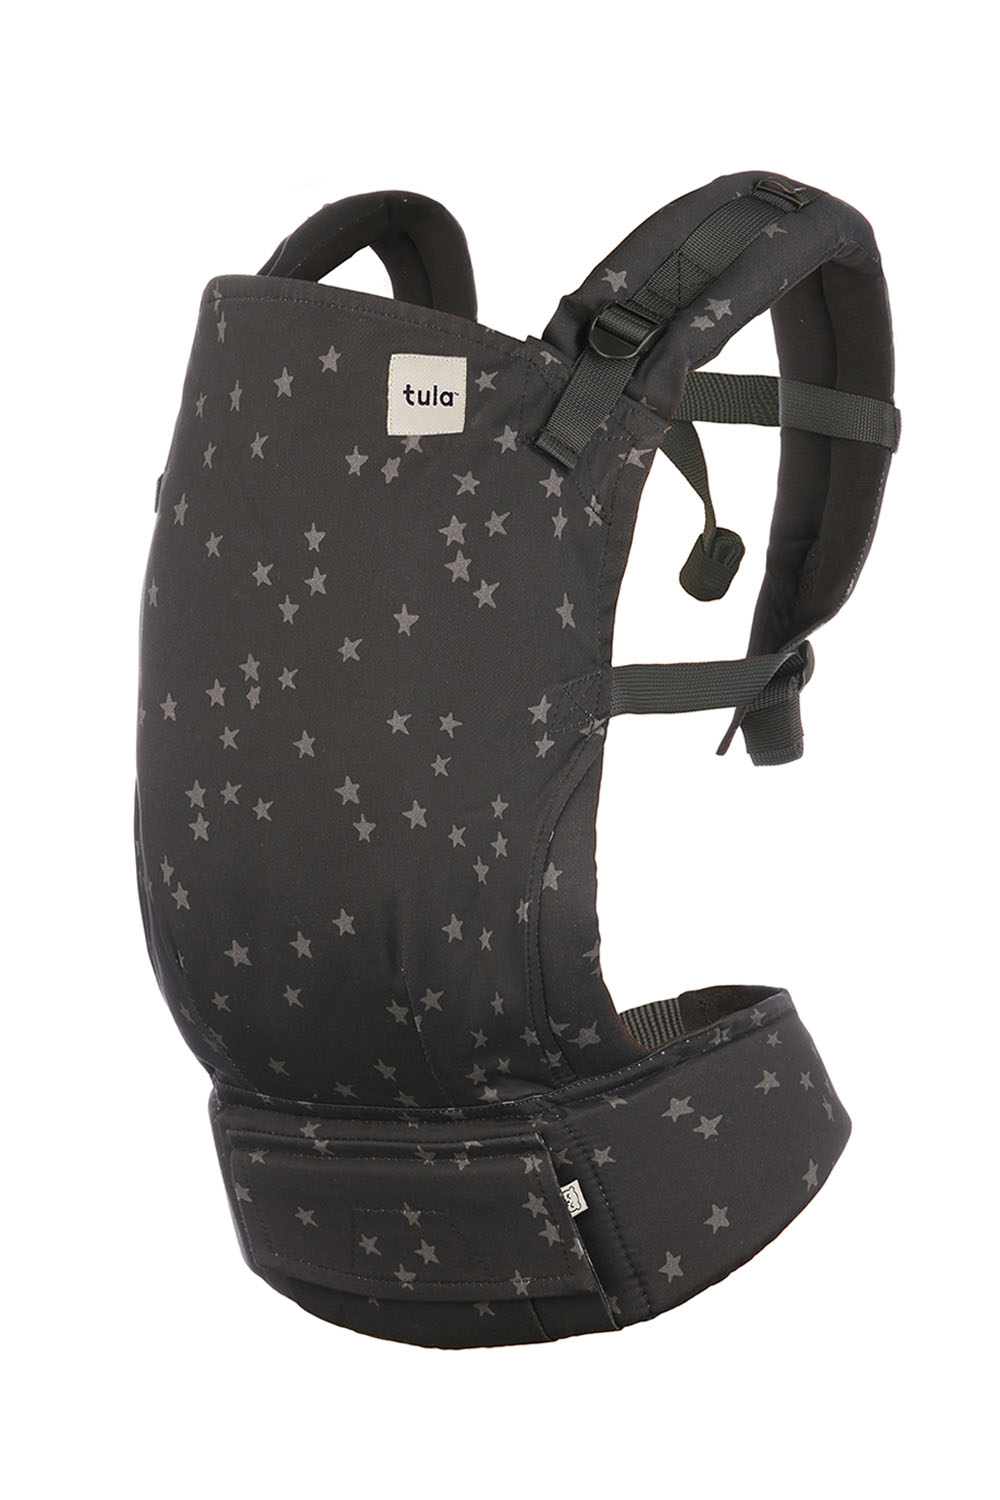 Discover - Tula Toddler Carrier